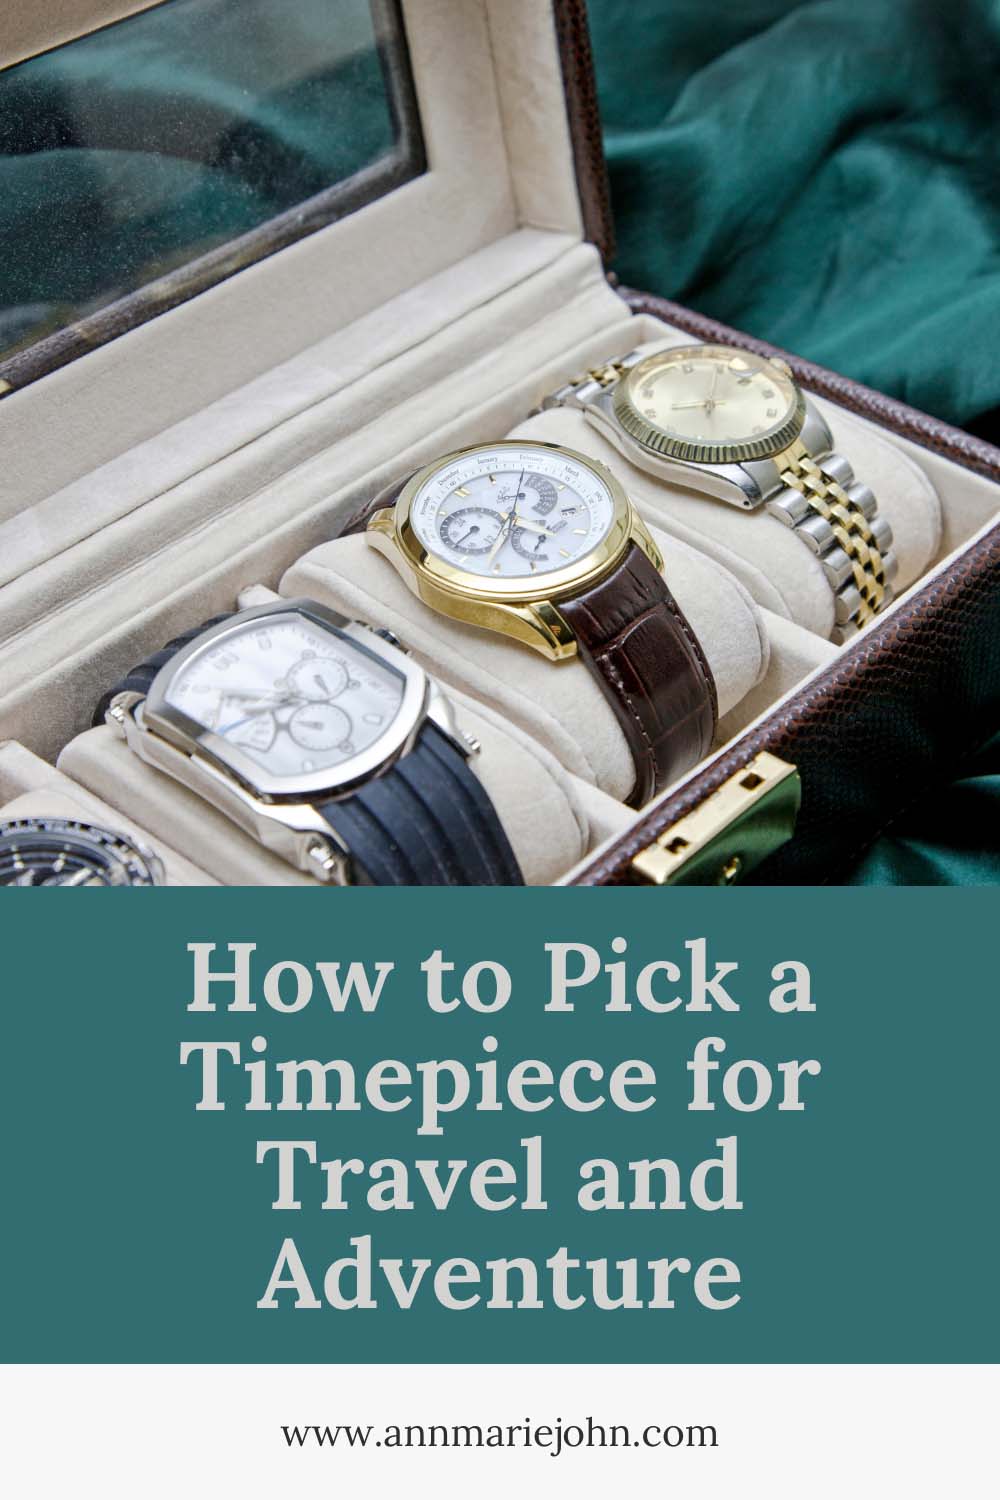 How to Pick a Timepiece for Travel and Adventure